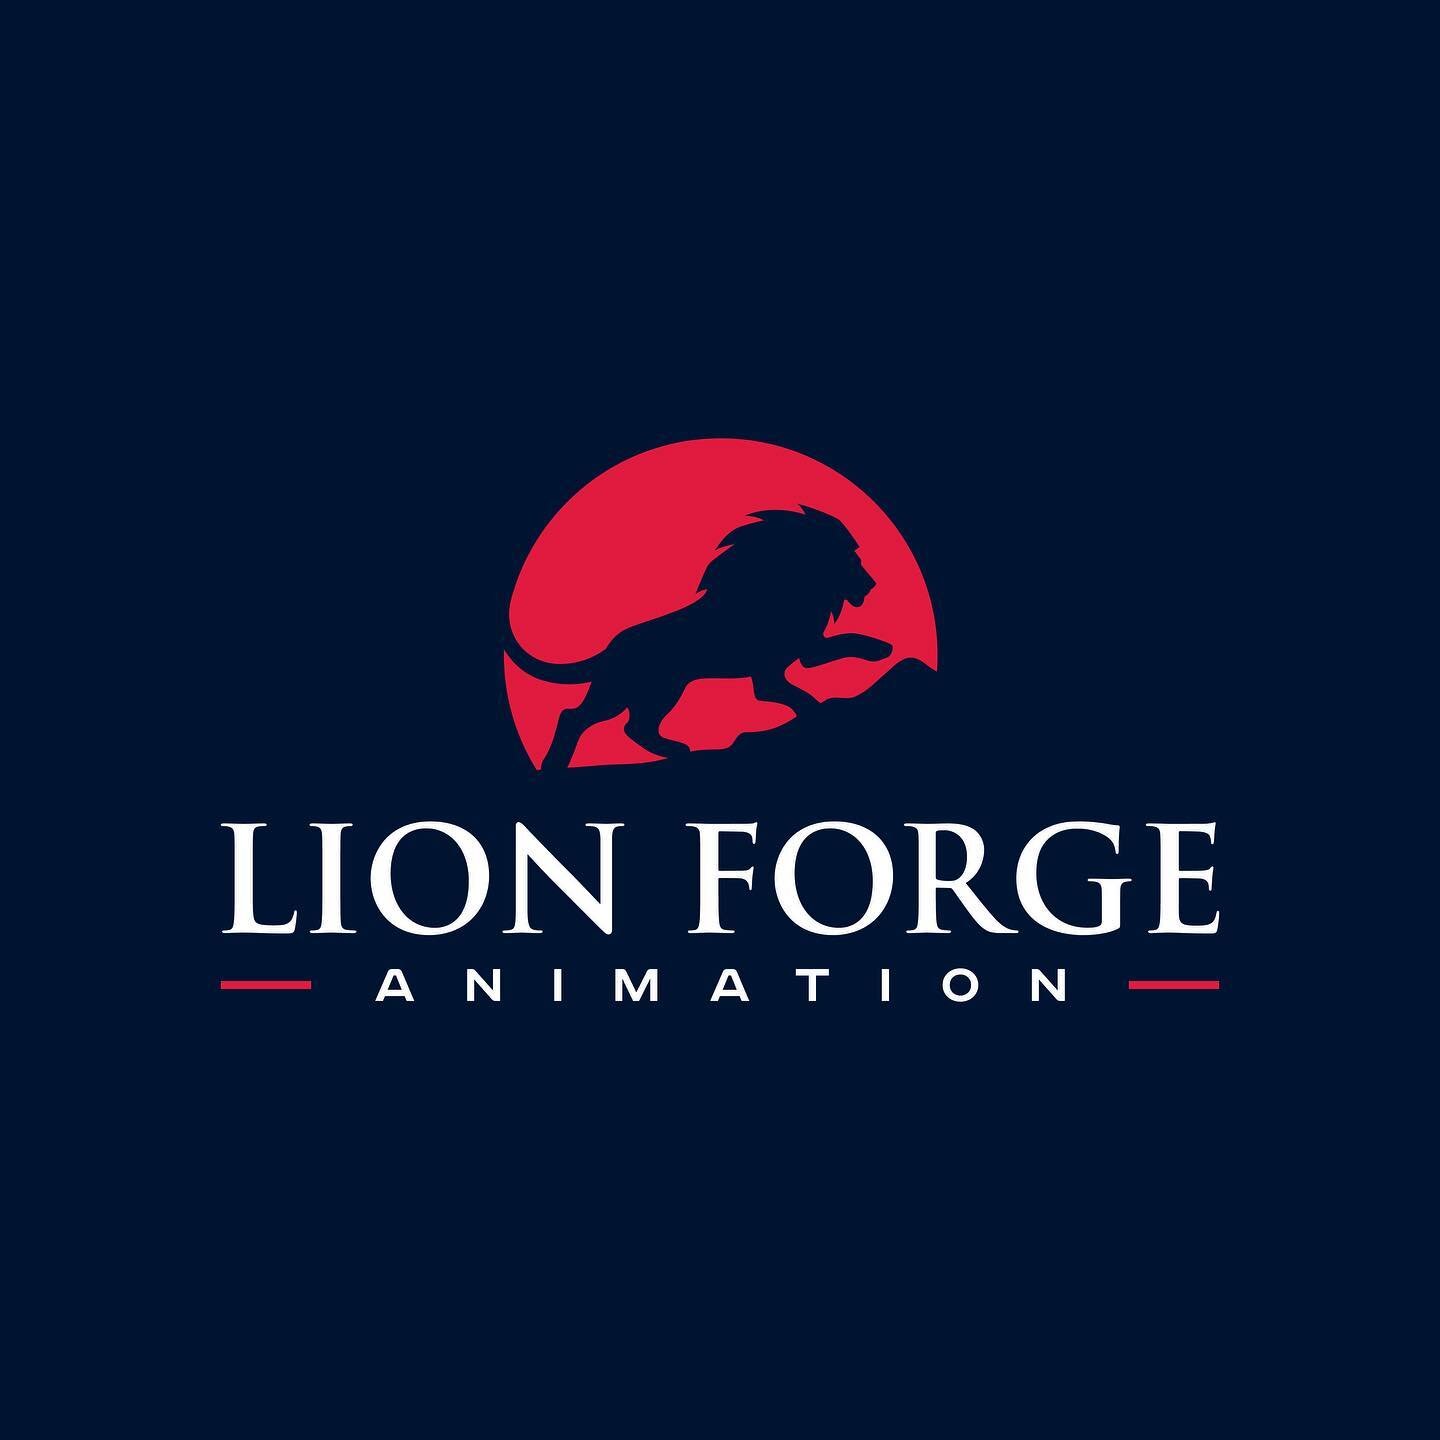 Raawwrrr! I had the opportunity to rebrand the identity for @lionforgeanimation a little while back. Creating a logo featuring a lion is surprisingly difficult, as most of the angles are 3/4 view (which look the best). After landing on the final mark